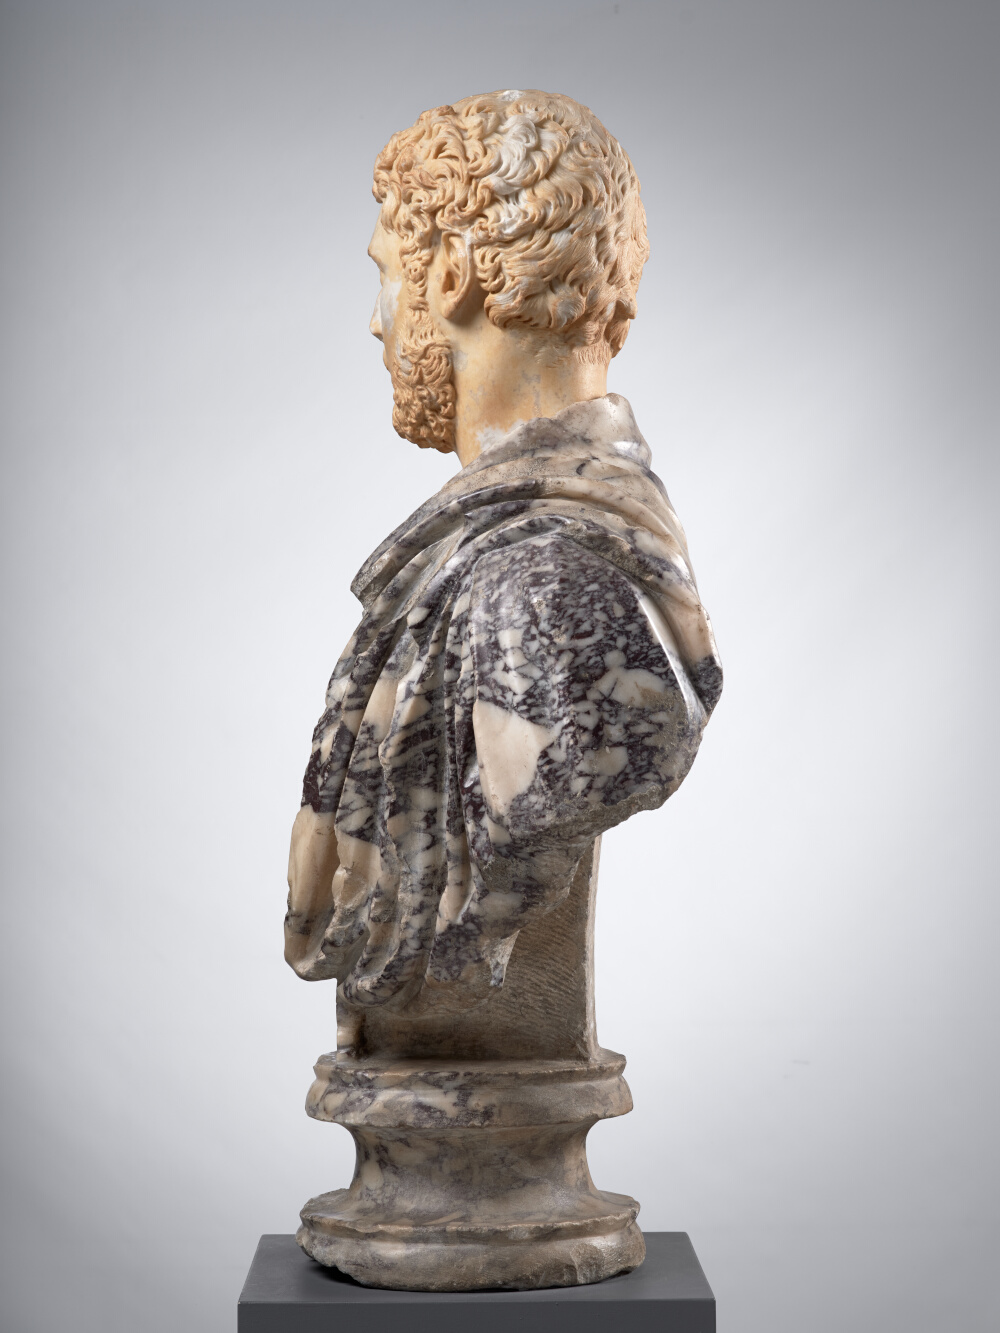 Man’s head, now mounted on a bust of Pavonazzetto marble